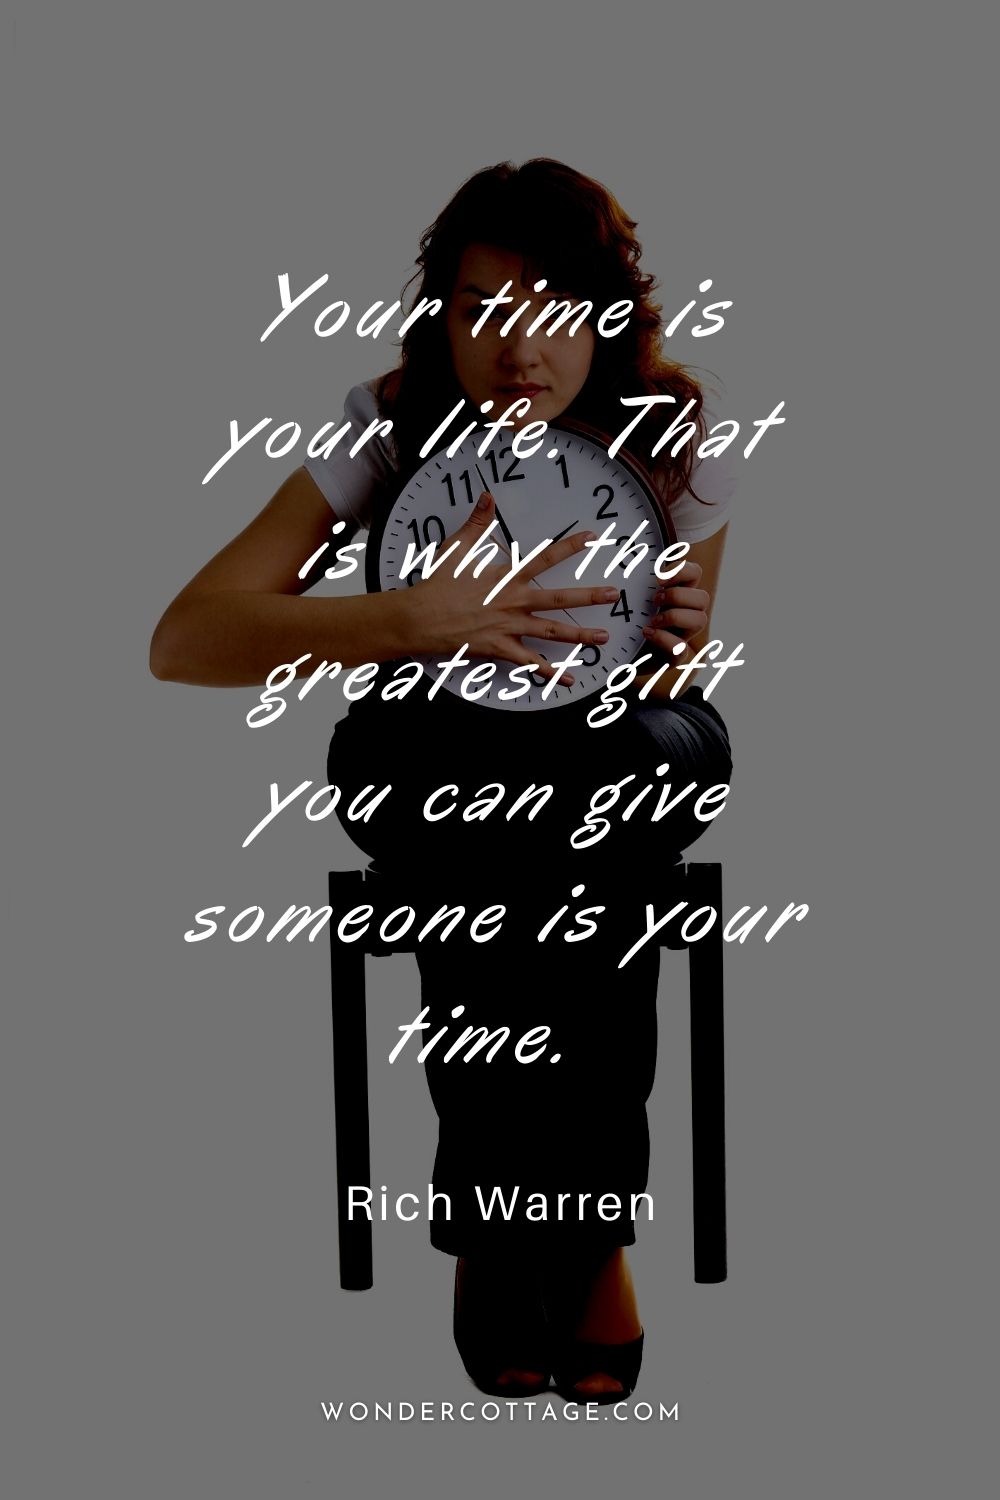 Your time is your life. That is why the greatest gift you can give someone is your time.  Rich Warren